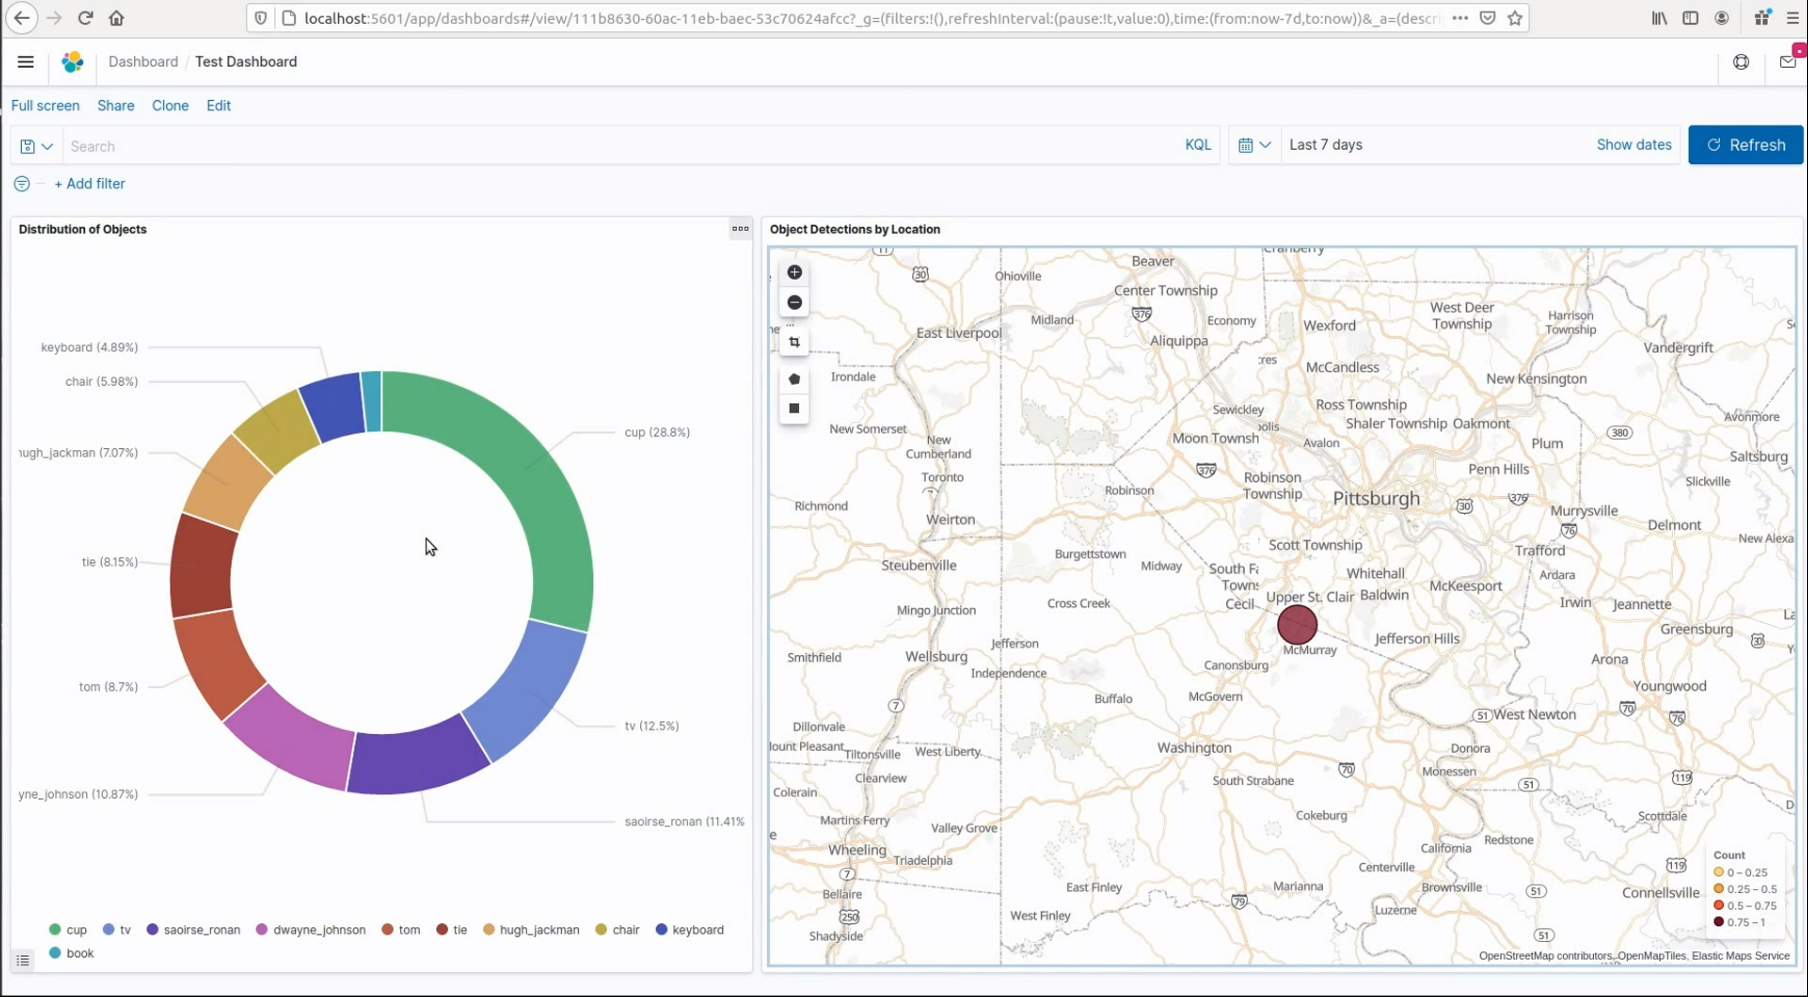 OpenScout Data visualized in the Kibana dashboard